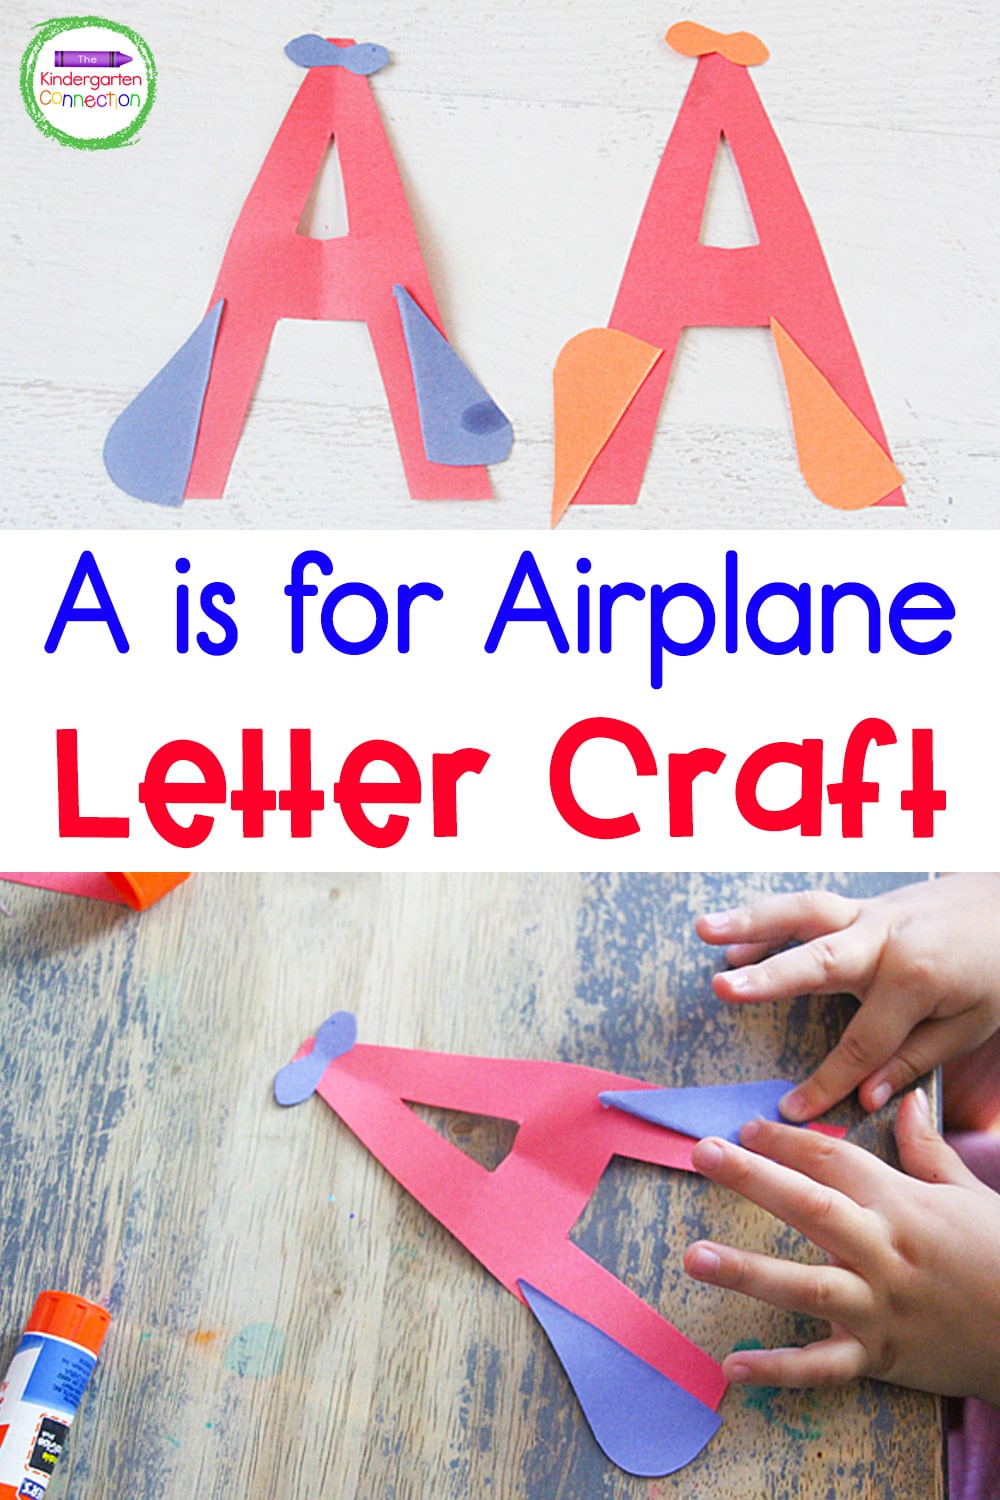 One of my favorite ways to practice letter recognition skills is with letter crafts like this A is for Airplane long vowel letter A craft!